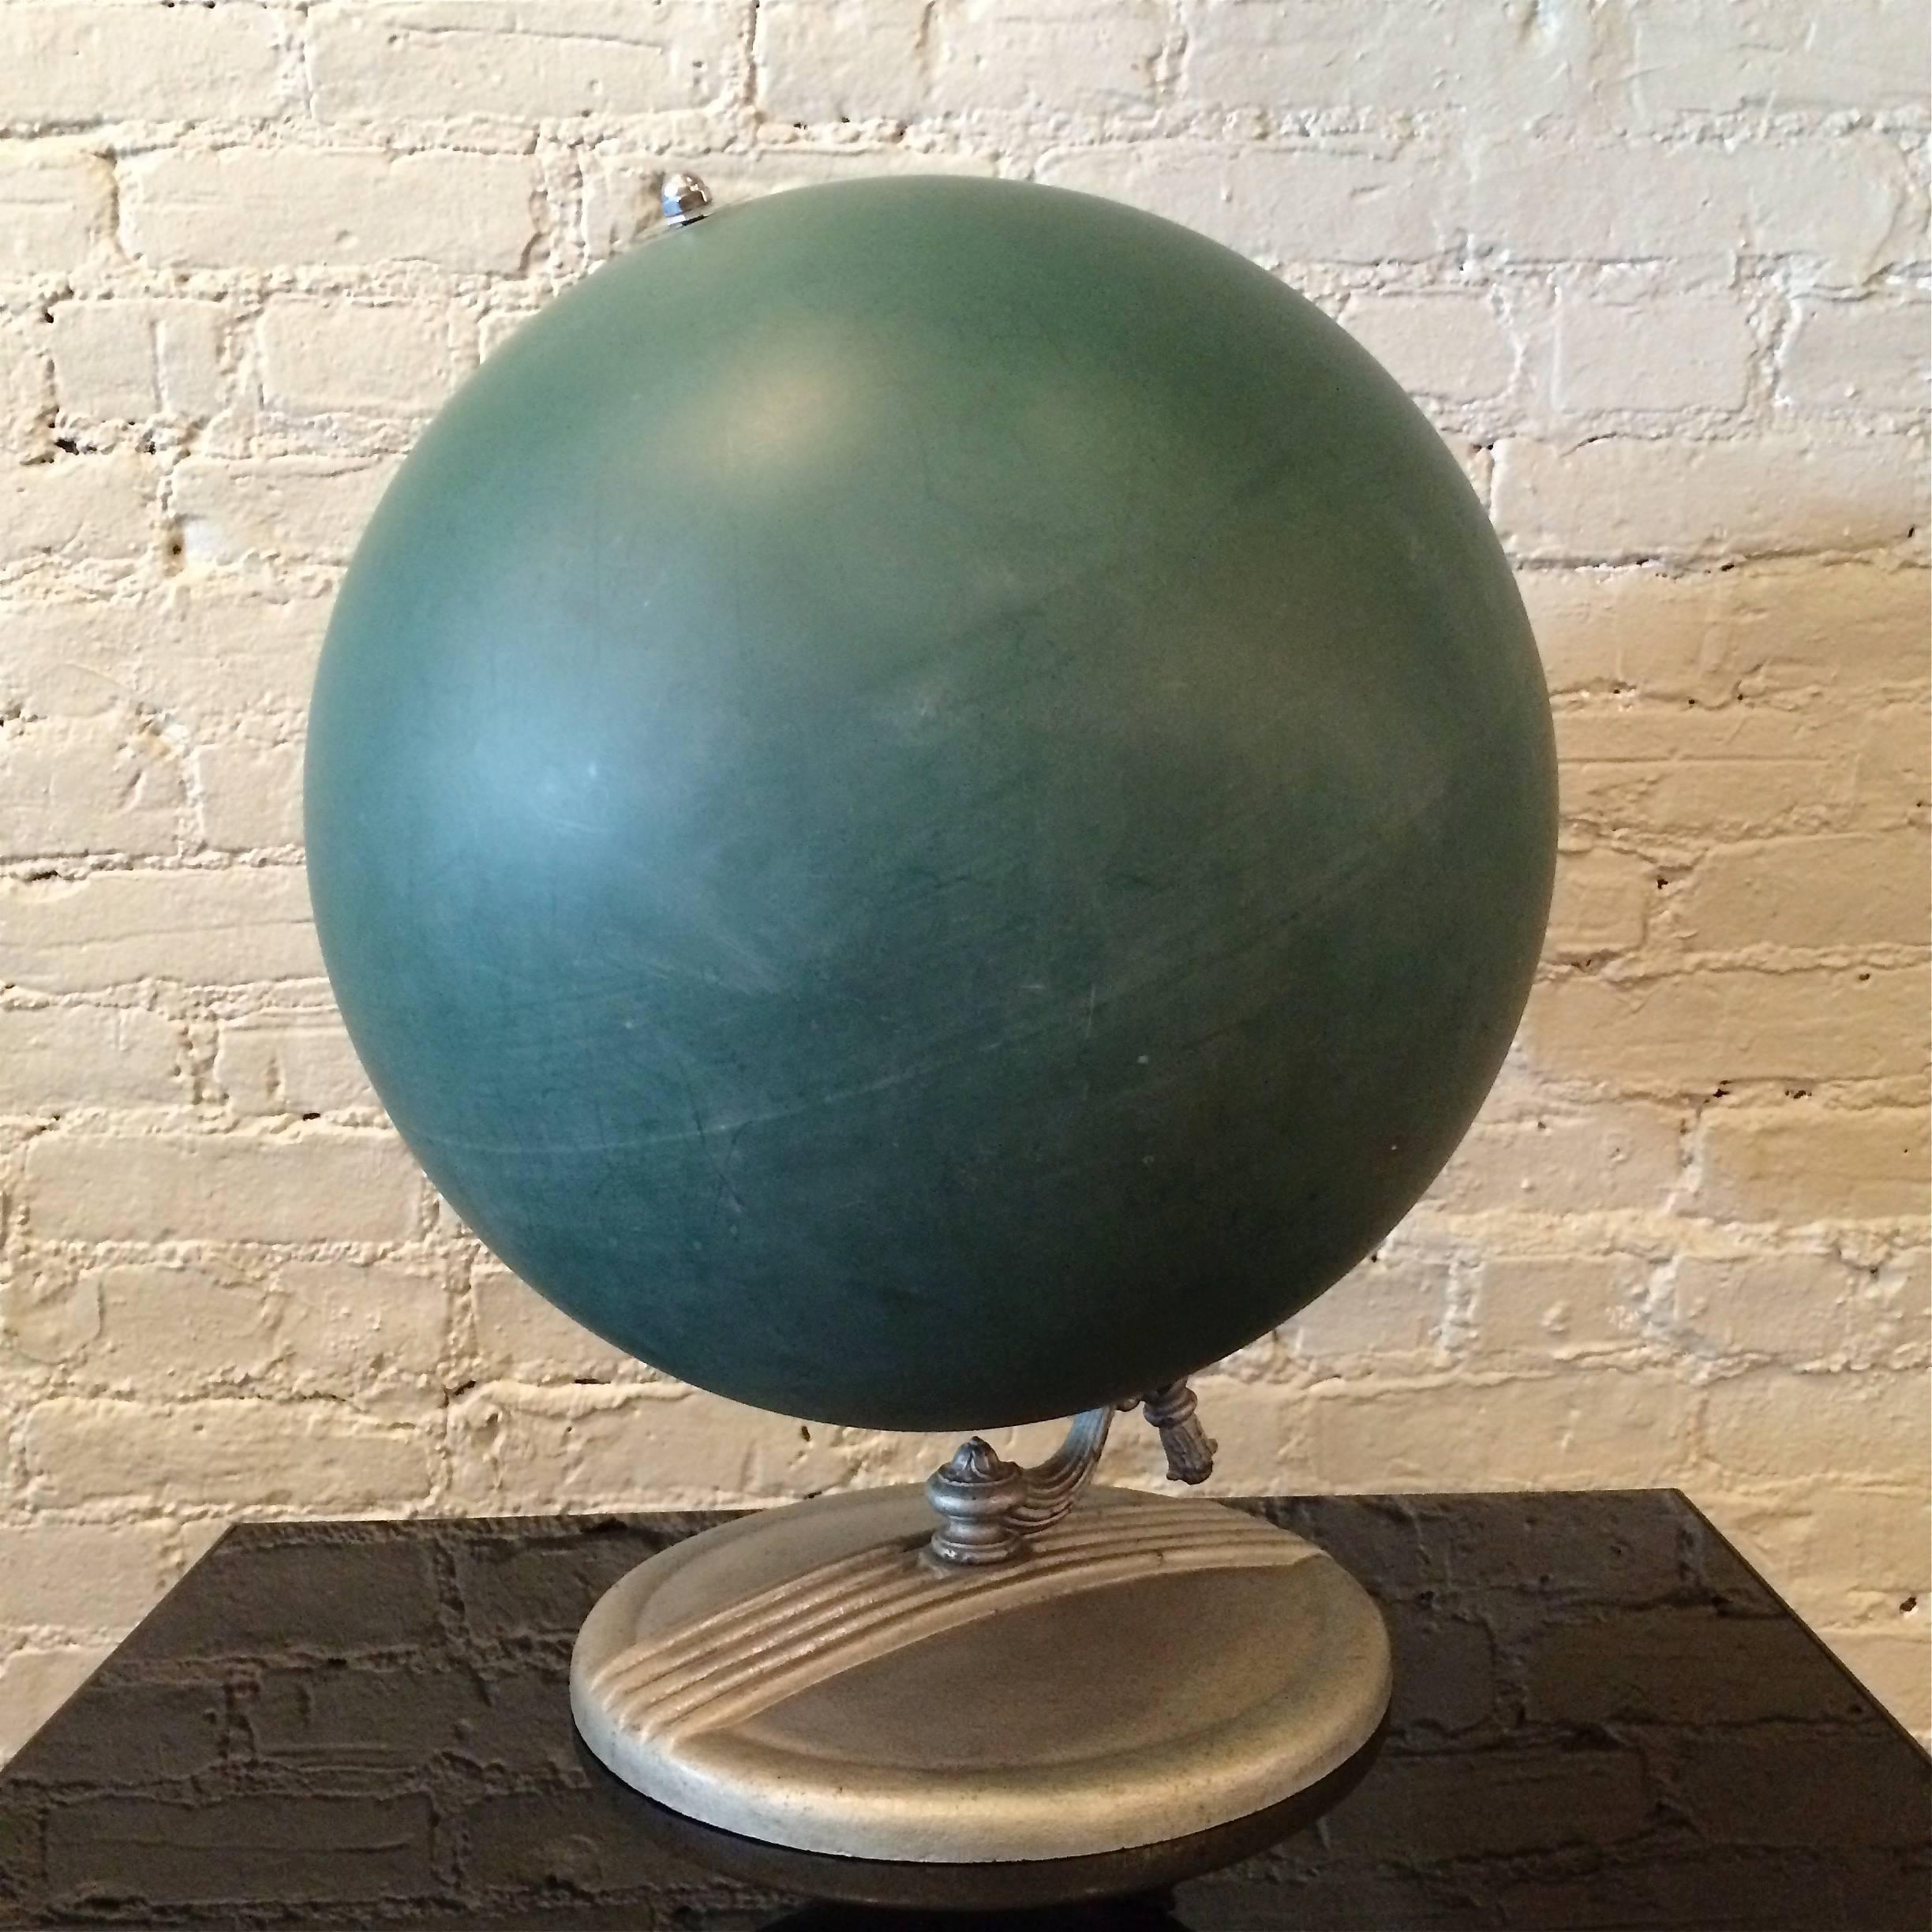 Unusual, tabletop, chalk globe, circa 1940s with green composite surface and decorative cast zinc base.